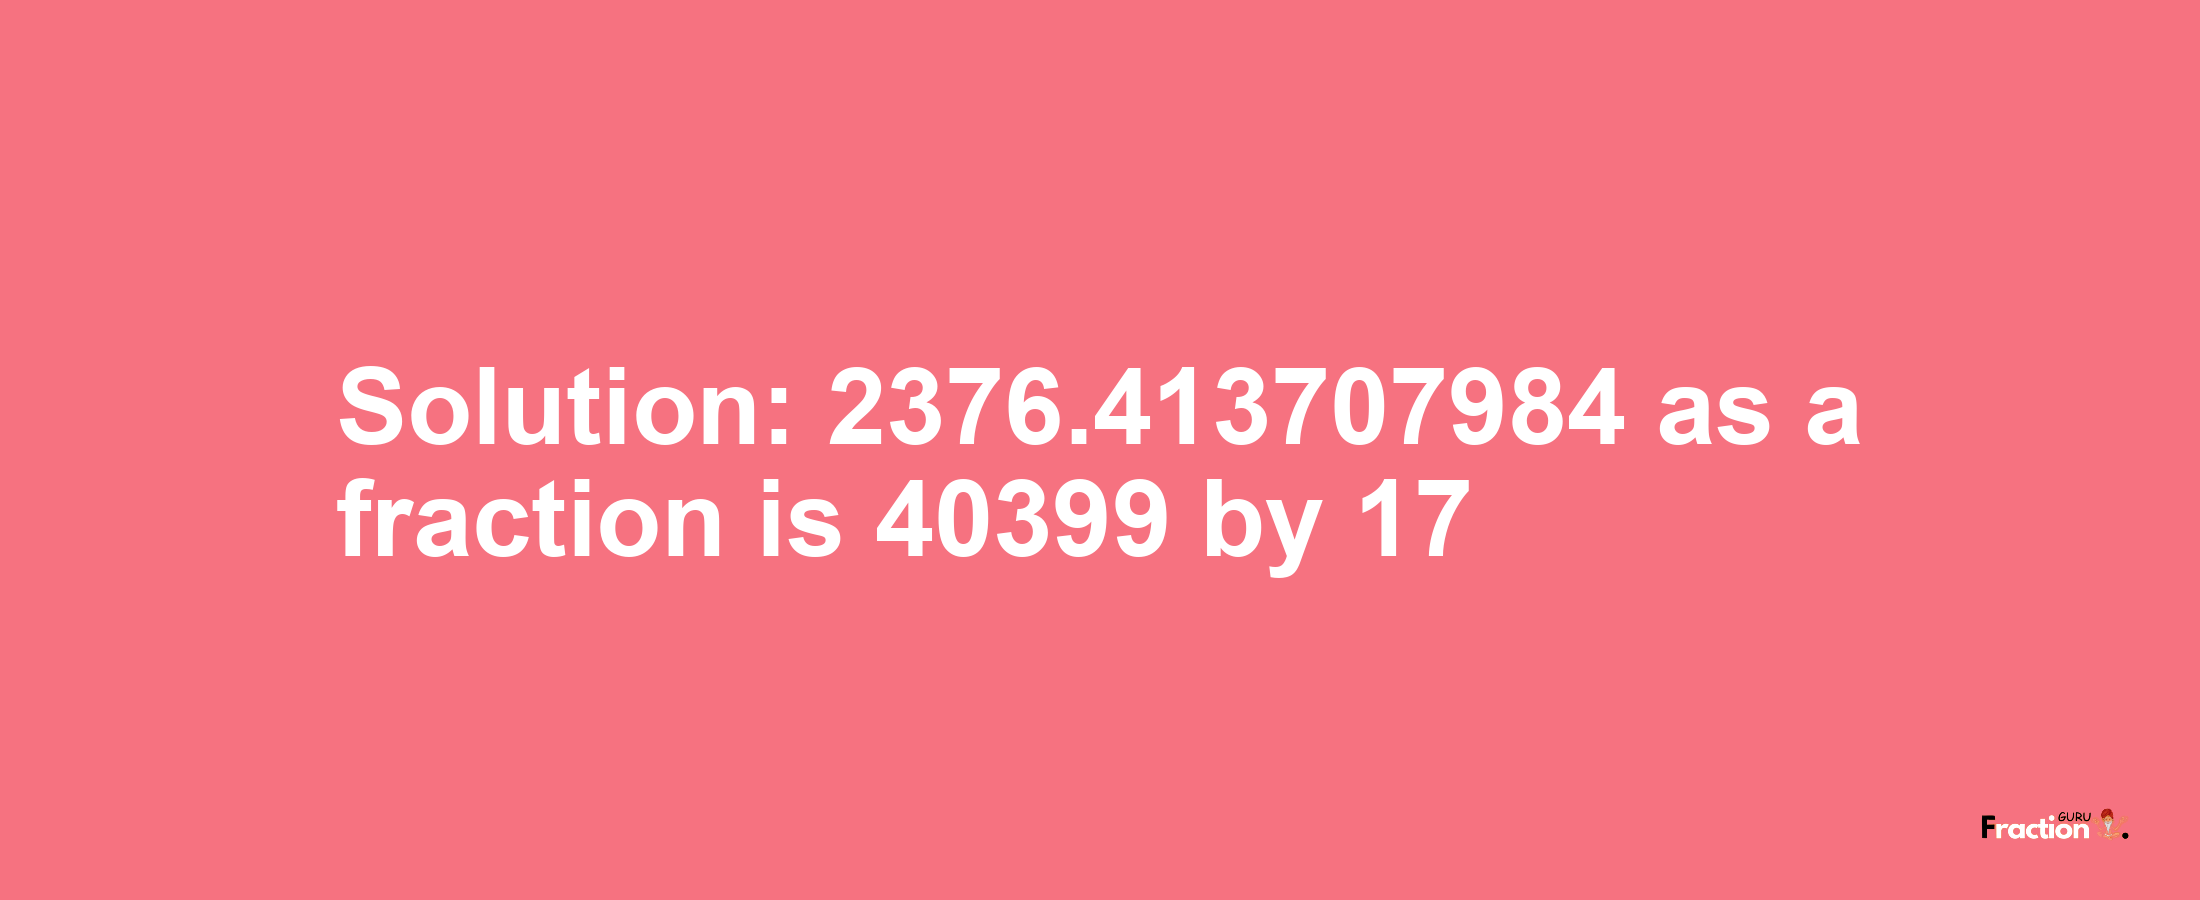 Solution:2376.413707984 as a fraction is 40399/17